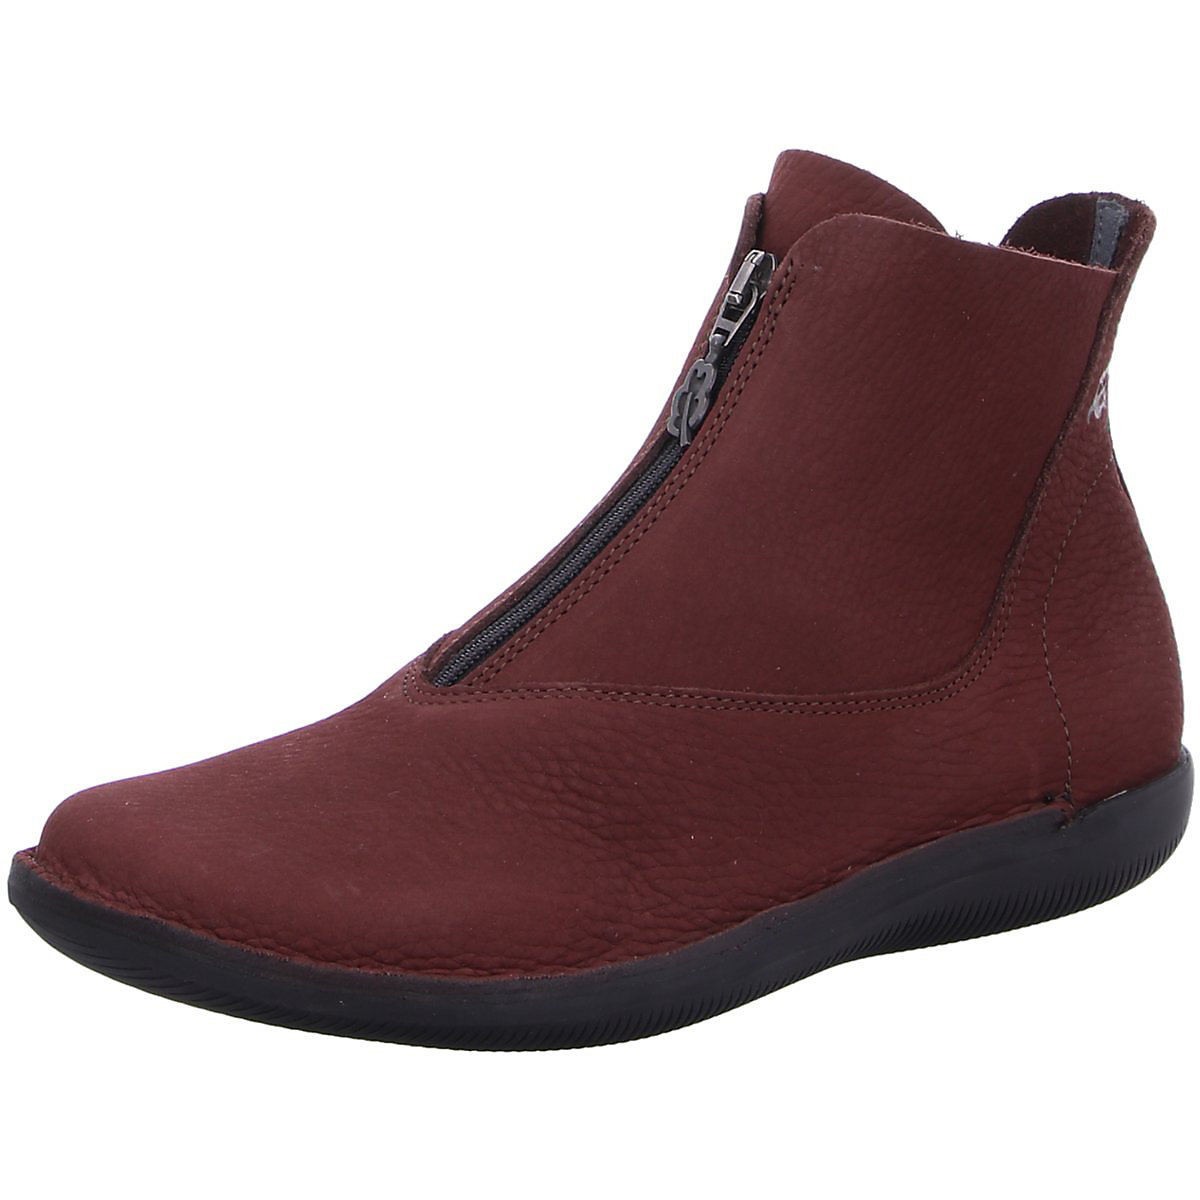 LOINT'S OF HOLLAND Stiefel & Stiefeletten rot